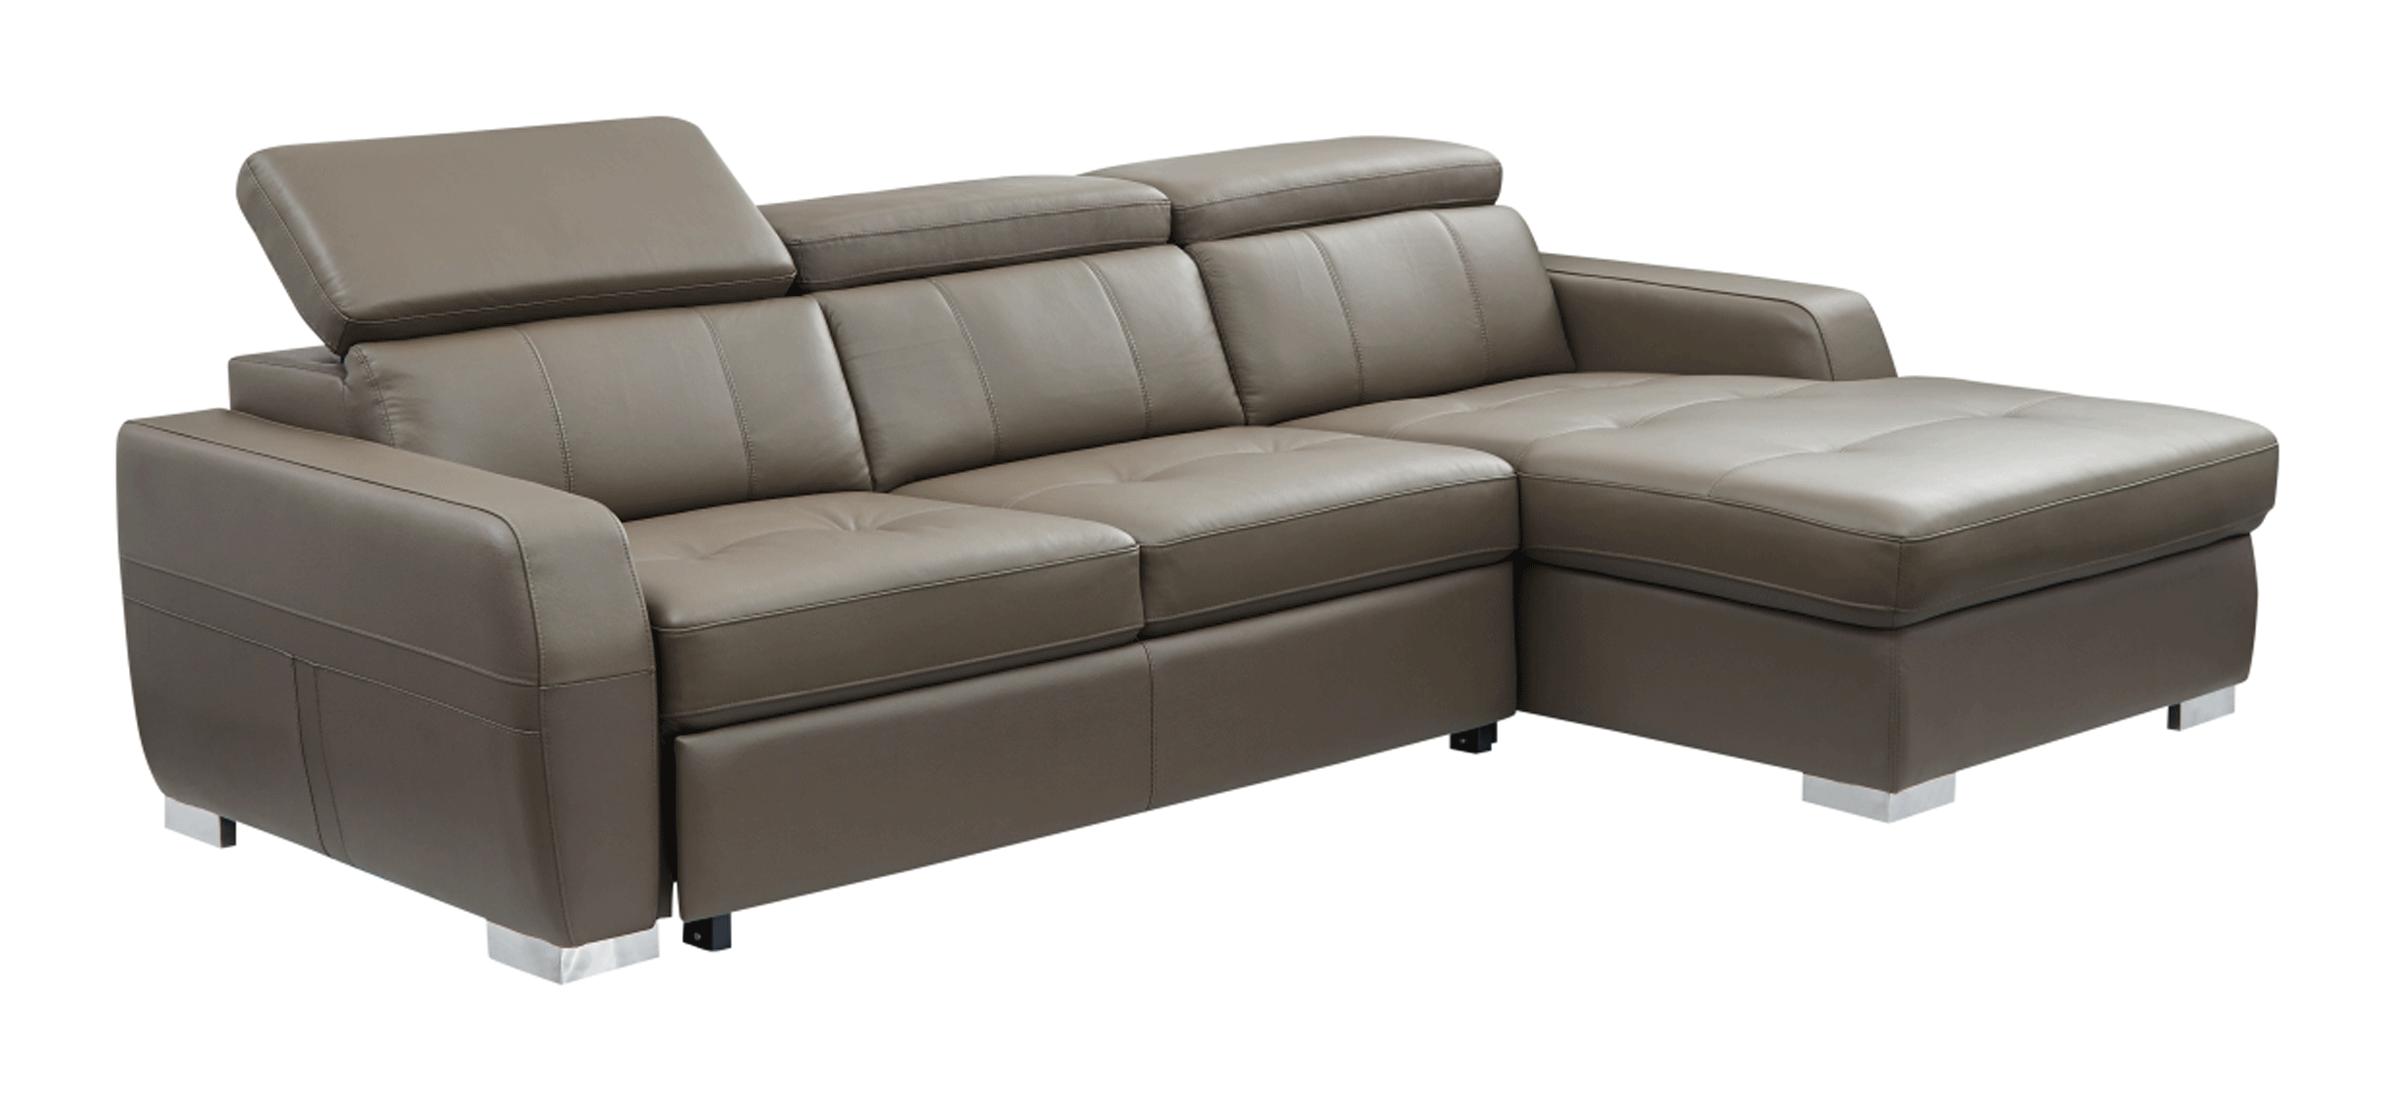 Contemporary, Traditional Sectional Sofa Bed 1822 1822SECTIONAL in Taupe Genuine Leather